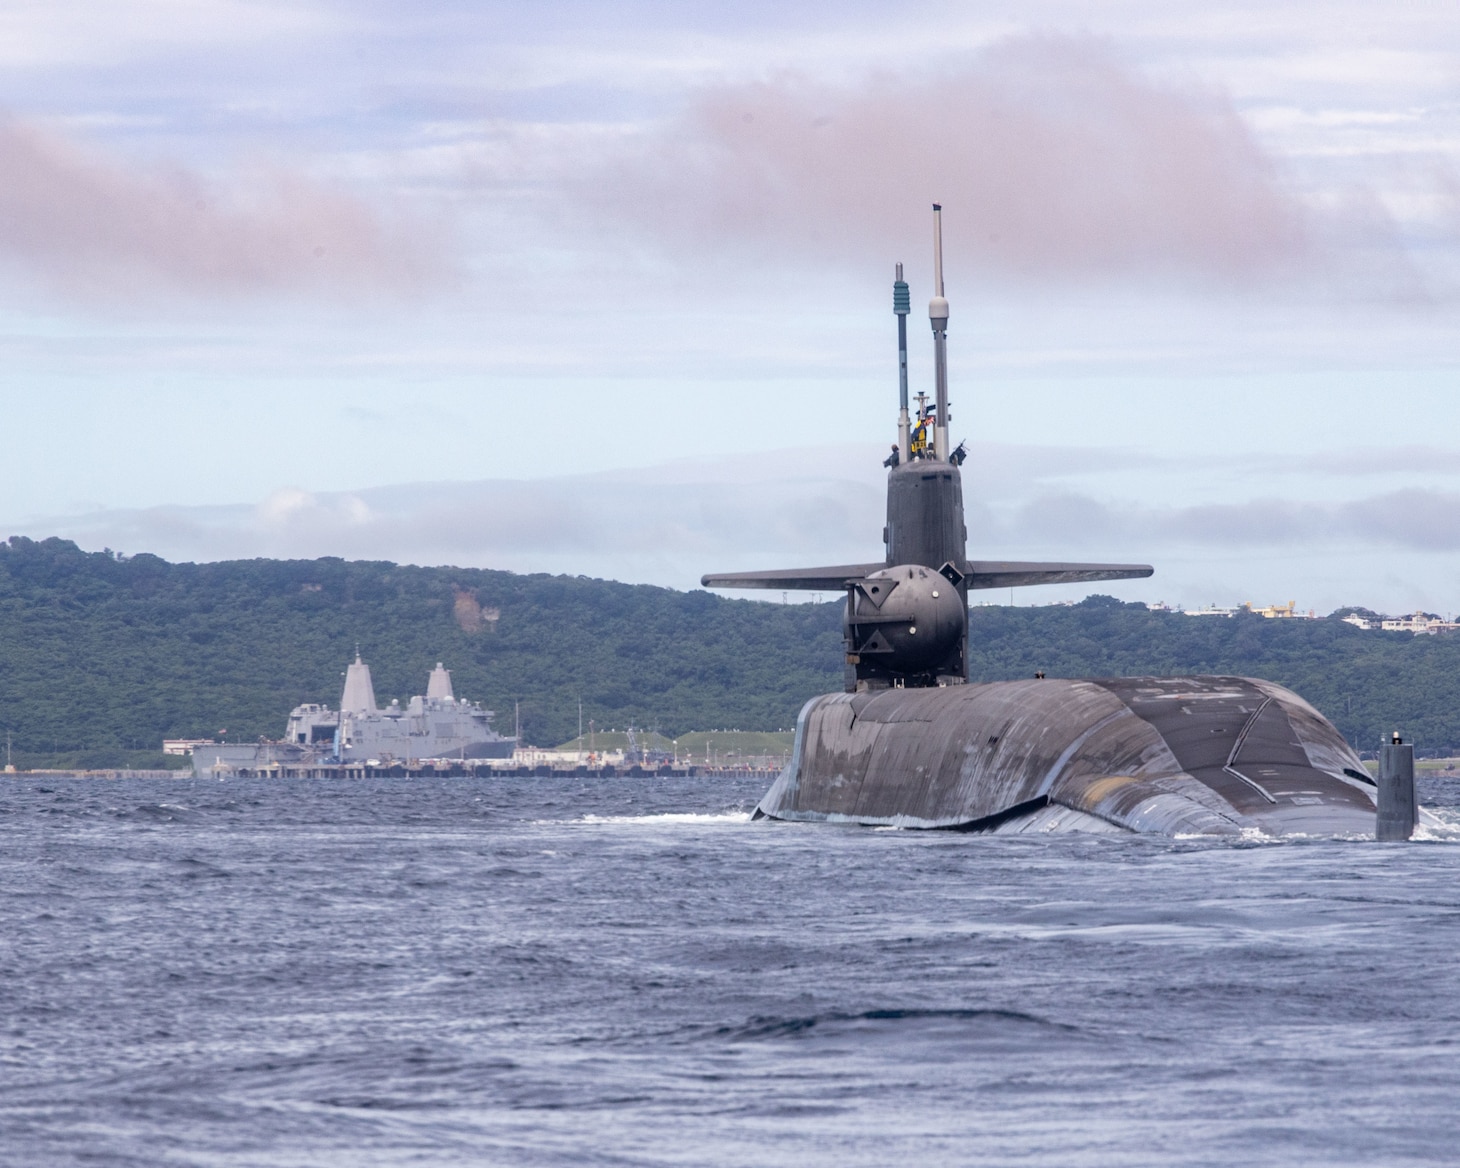 OKINAWA, Japan (Nov. 10, 2022) The Ohio-class guided-missile submarine USS Michigan (SSGN 727) made a brief stop for personnel near Okinawa, Japan as part of its deployment to the U.S. 7th Fleet area of operations, Nov. 10. Michigan is homeported at Naval Base Kitsap, Washington and is operating in the U.S. 7th Fleet area of operations, conducting maritime security operations and supporting national security interests. (U.S. Marine Corps photo by Staff Sgt. Andrew Ochoa)